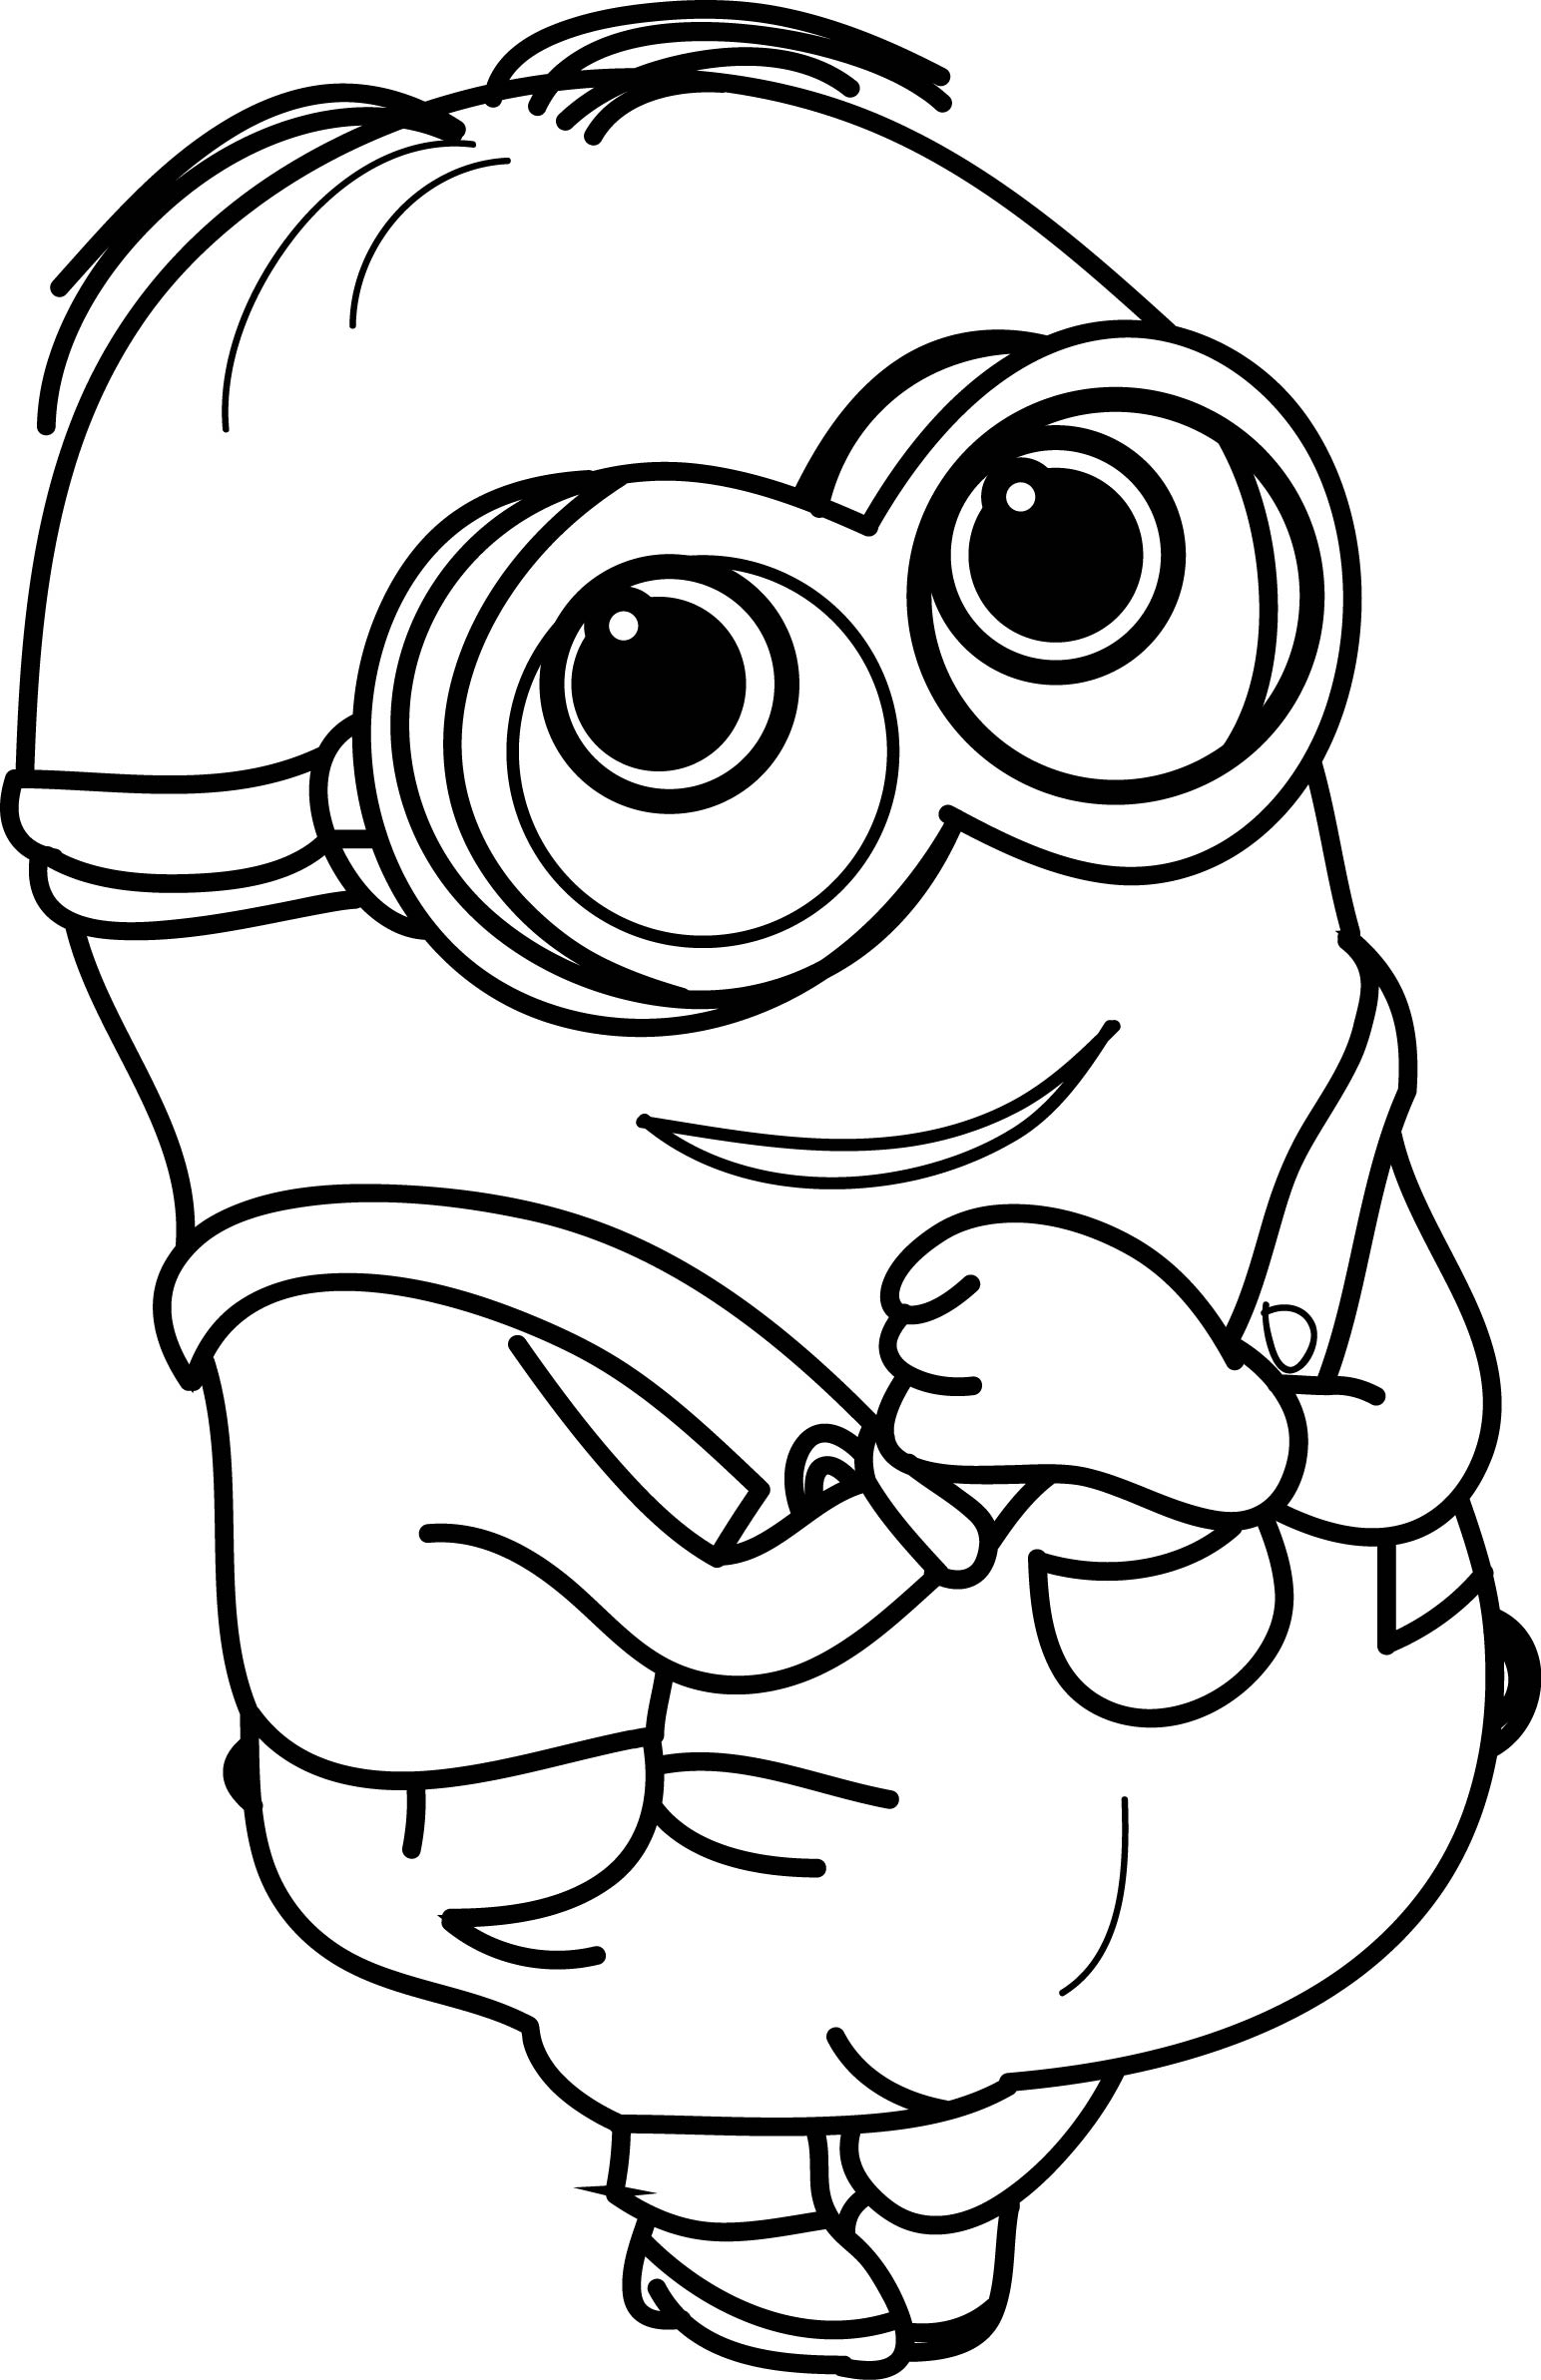 Easy Minion Coloring Pages at GetColorings.com | Free printable ...